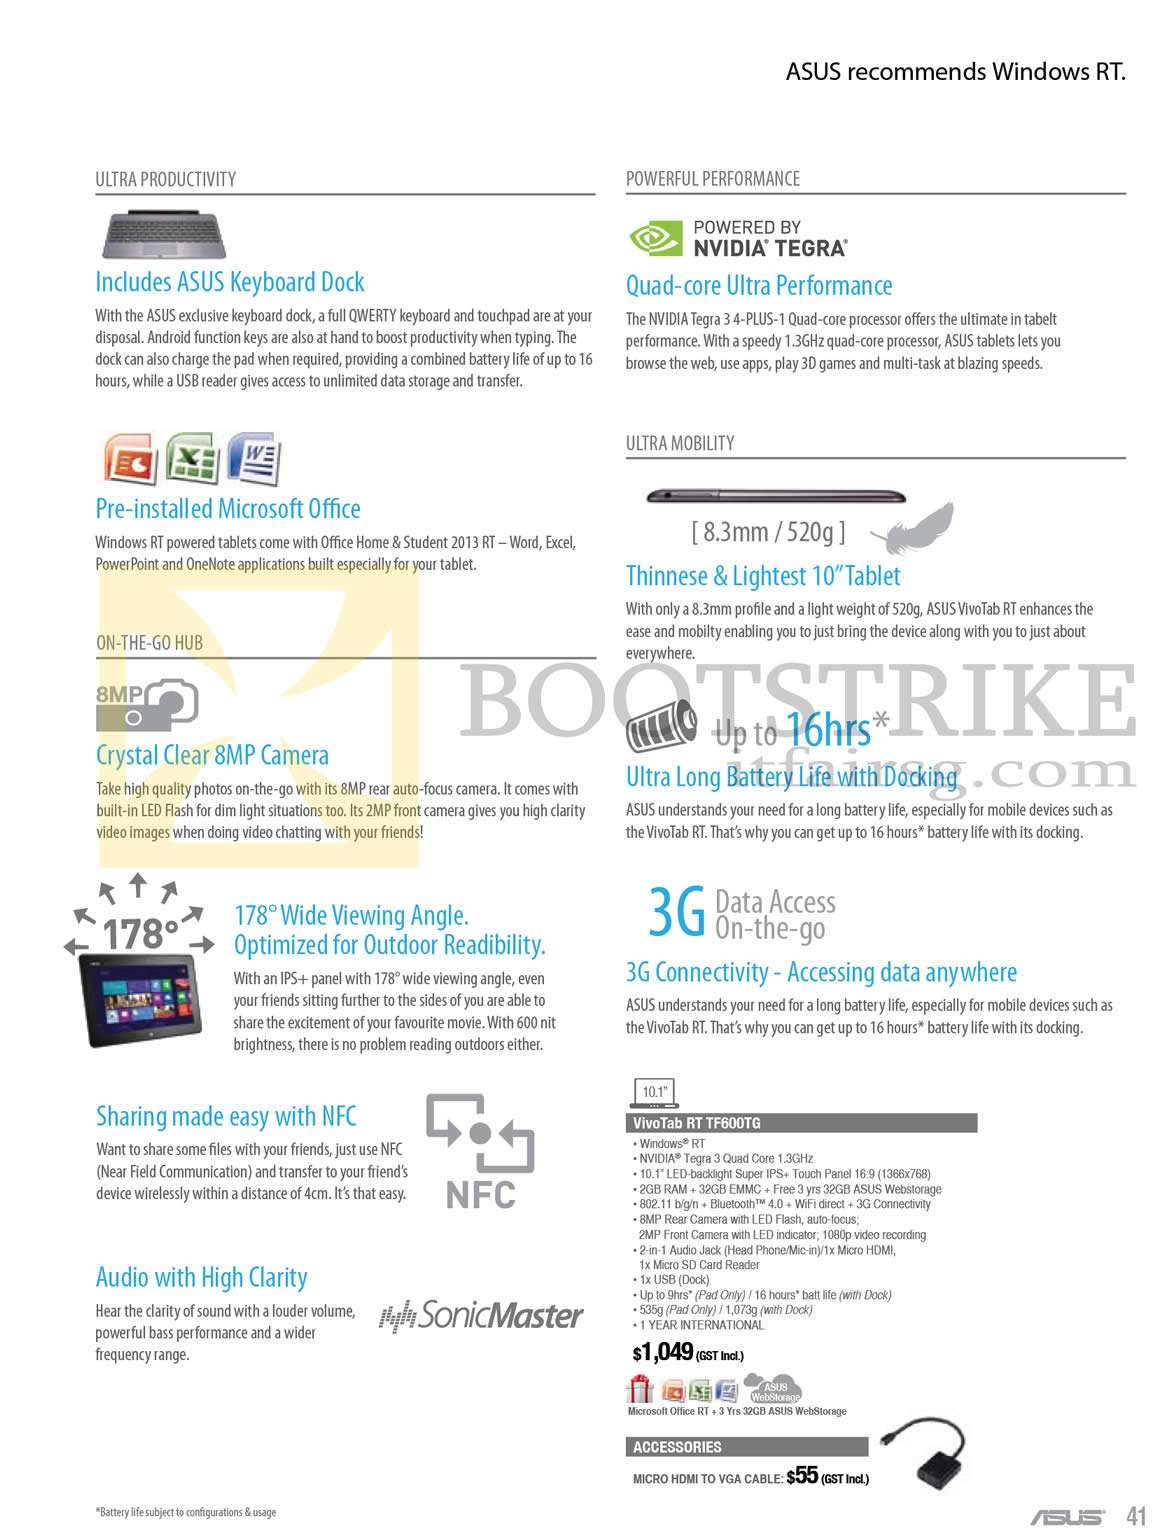 PC SHOW 2013 price list image brochure of ASUS Notebooks VivoTab RT TF600TG, Features, 3G, NFC